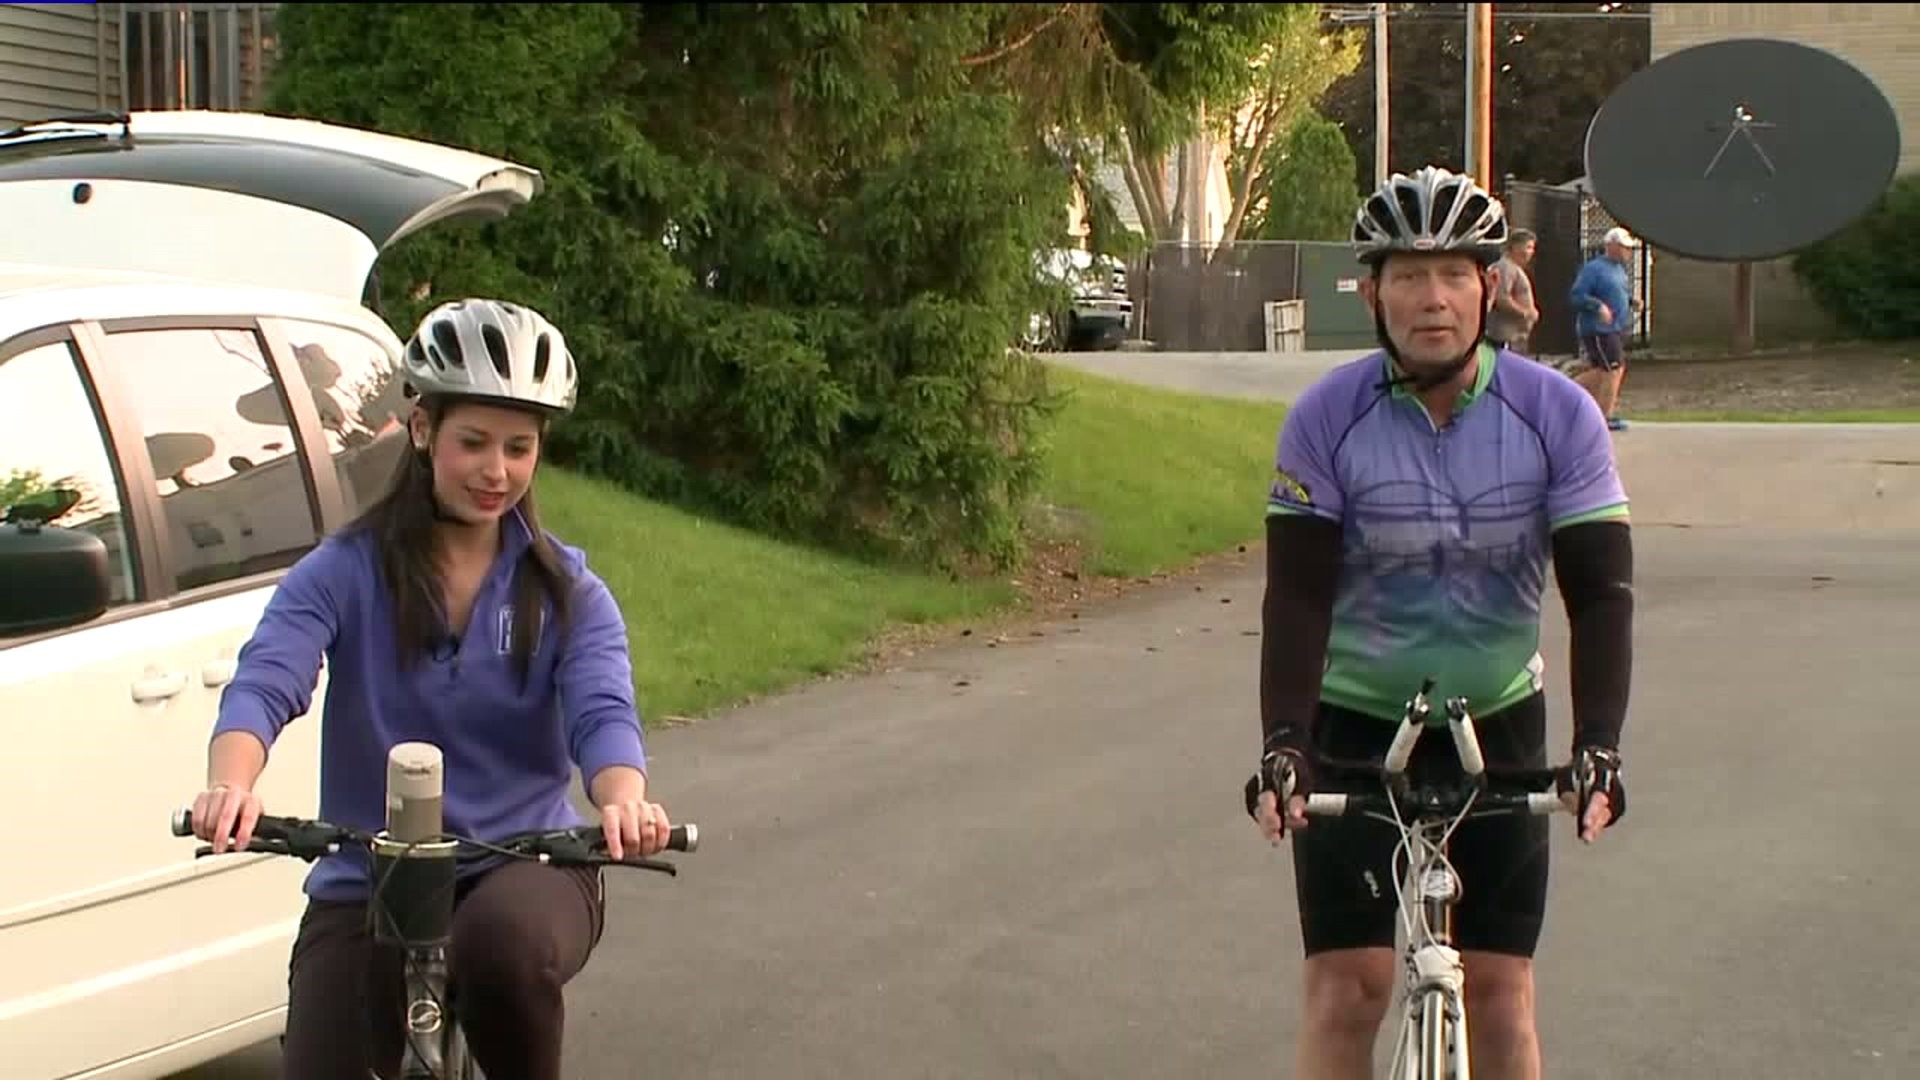 Local Cyclists Talk About Bicycle Safety